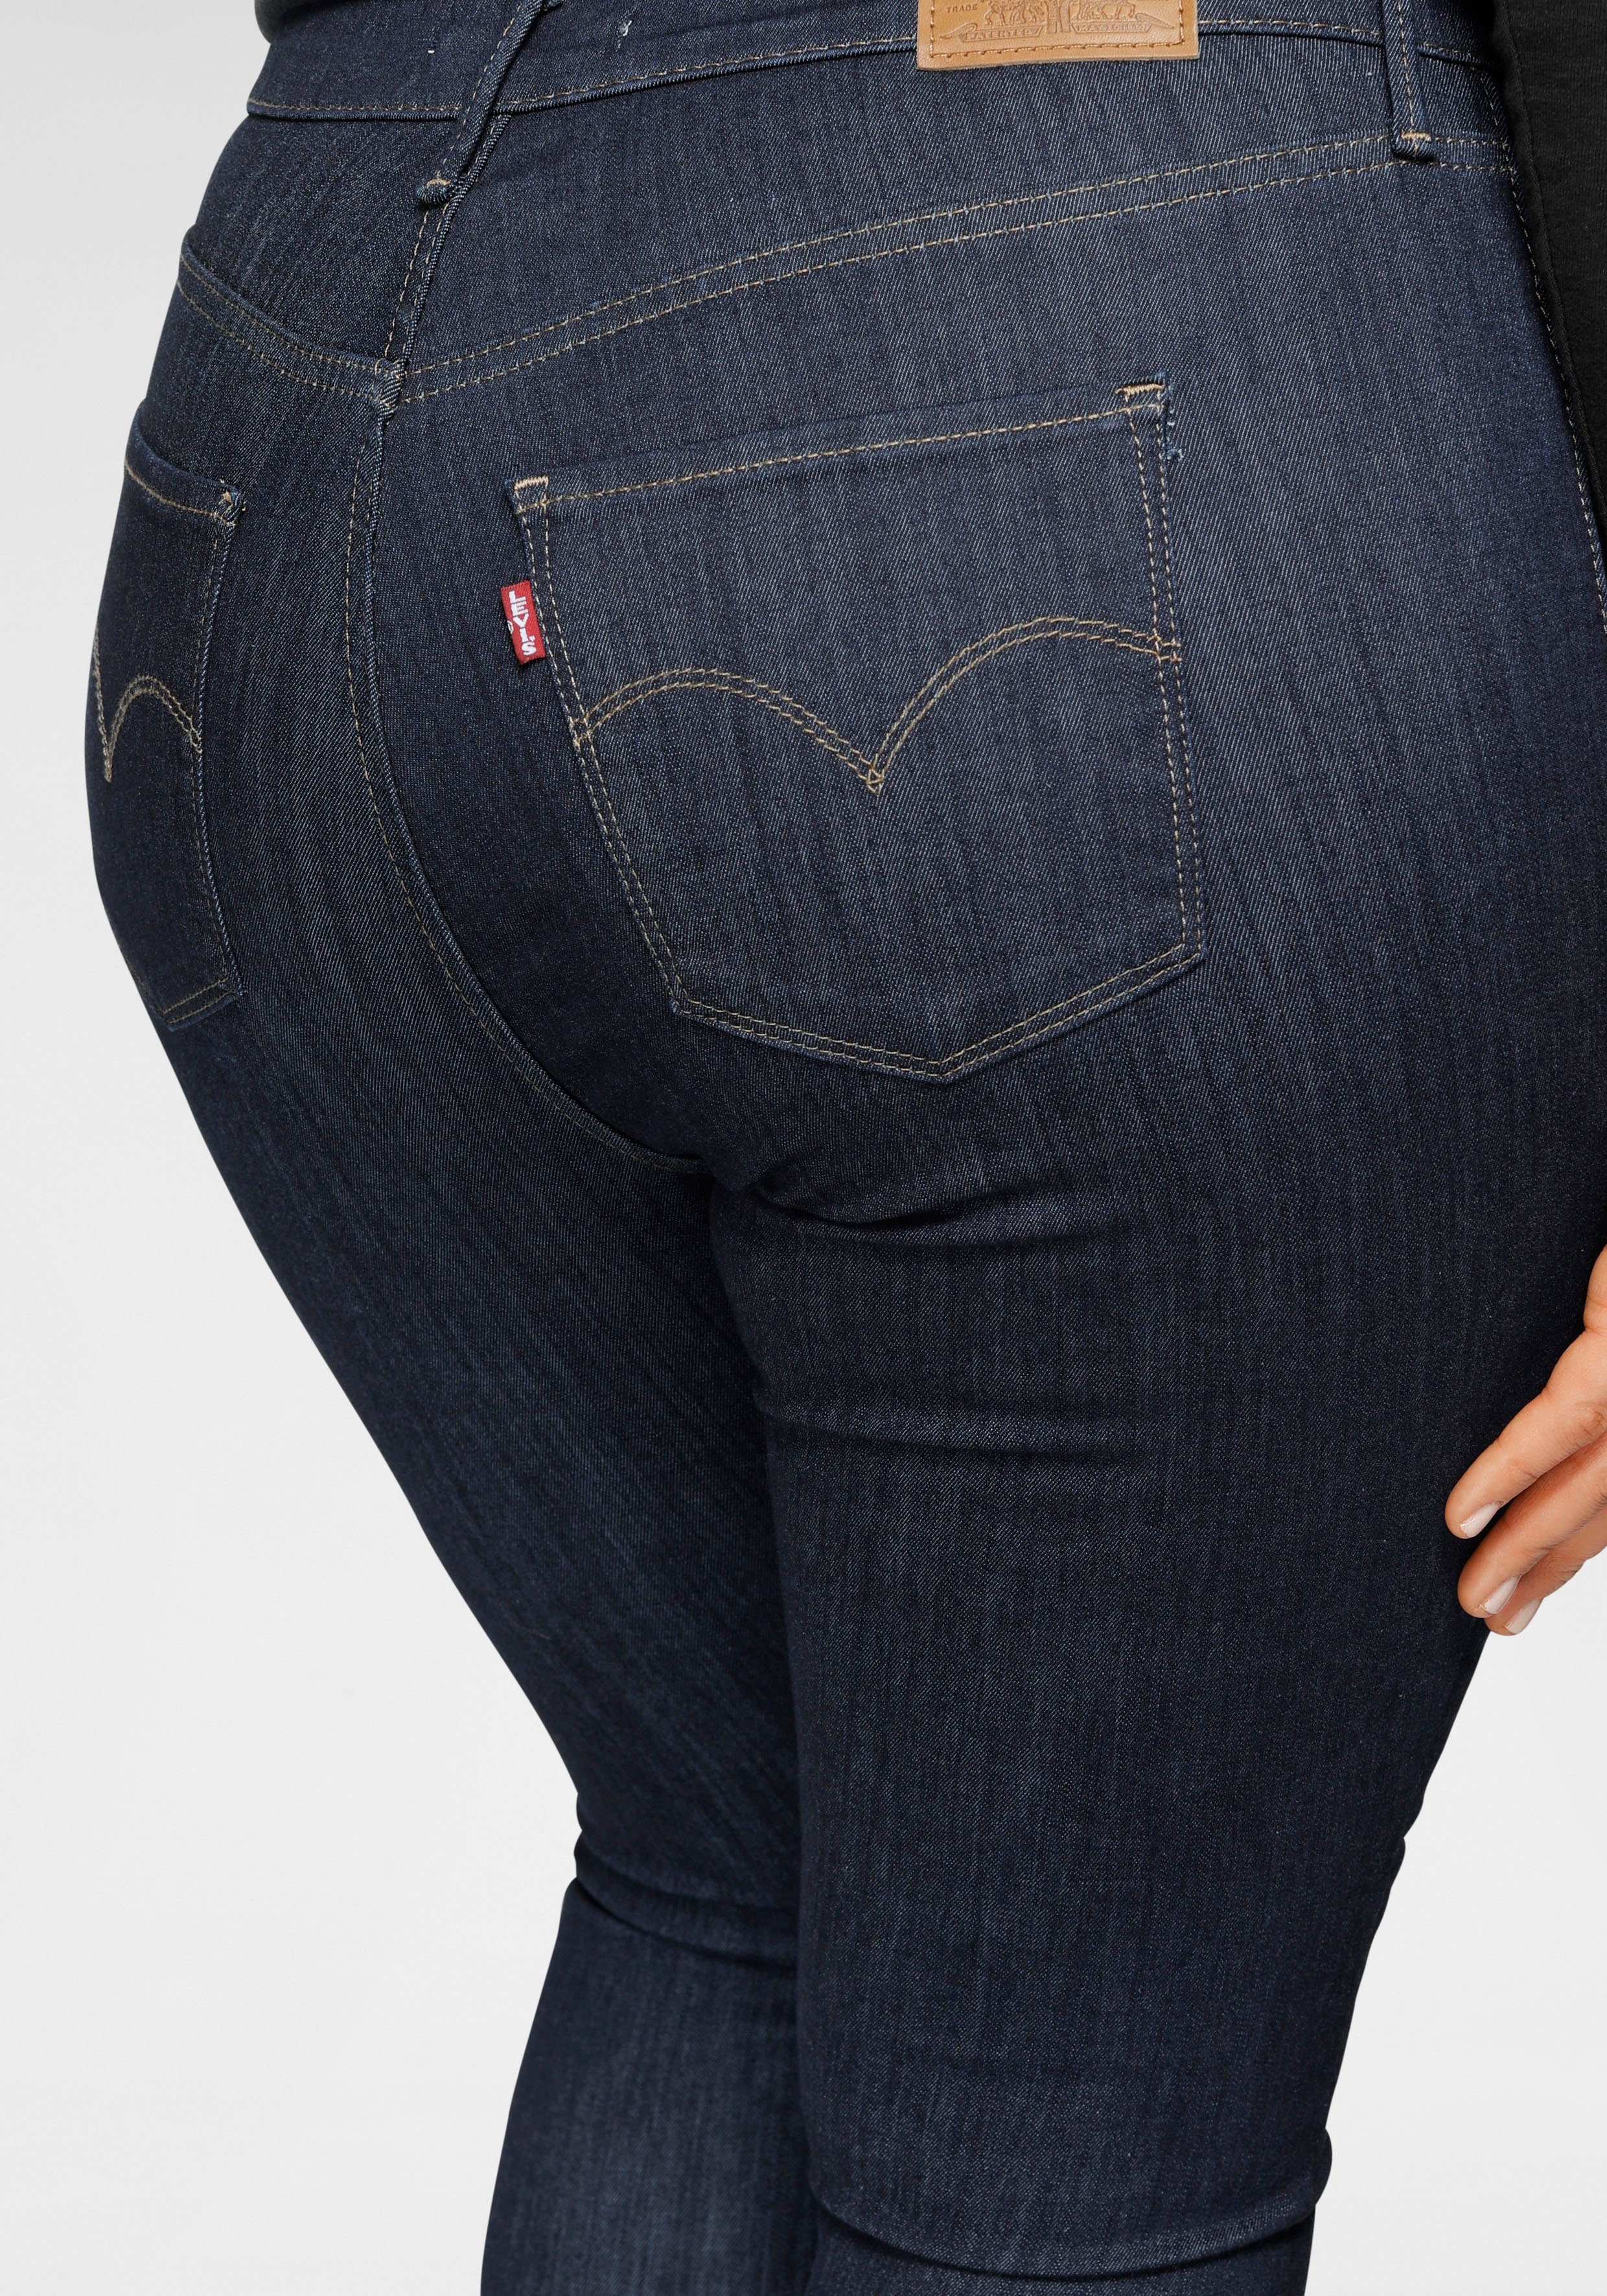 mit rinsed Plus High-Rise Levi's® Skinny-fit-Jeans hoher 720 Leibhöhe